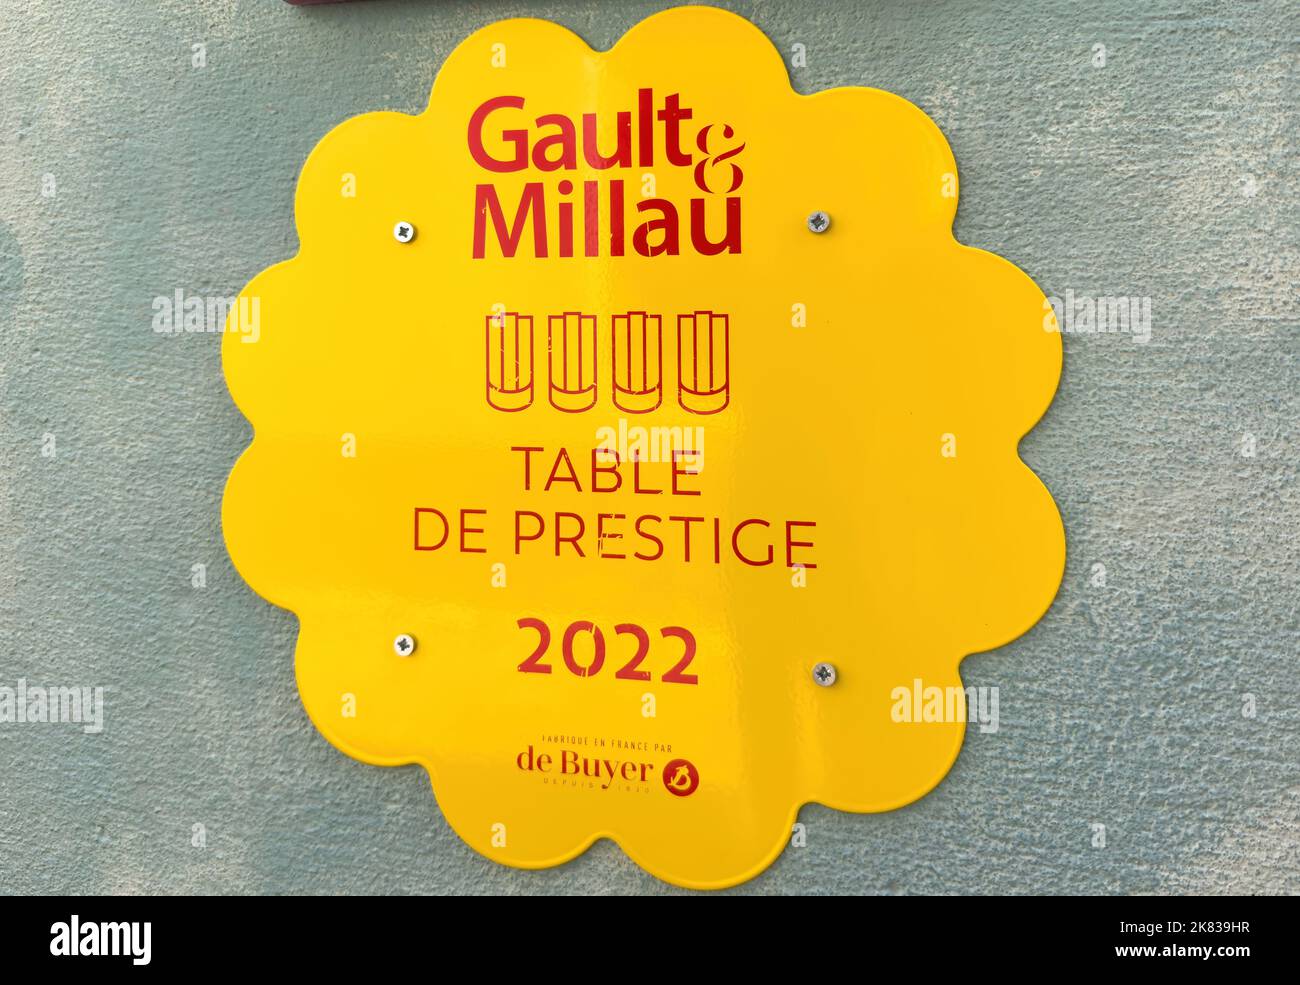 Ribeauville, France - Sep 22, 2022: Signage at the entrance of restaurant - Gault Milau guide table de prestige 2022 - de buyer Stock Photo